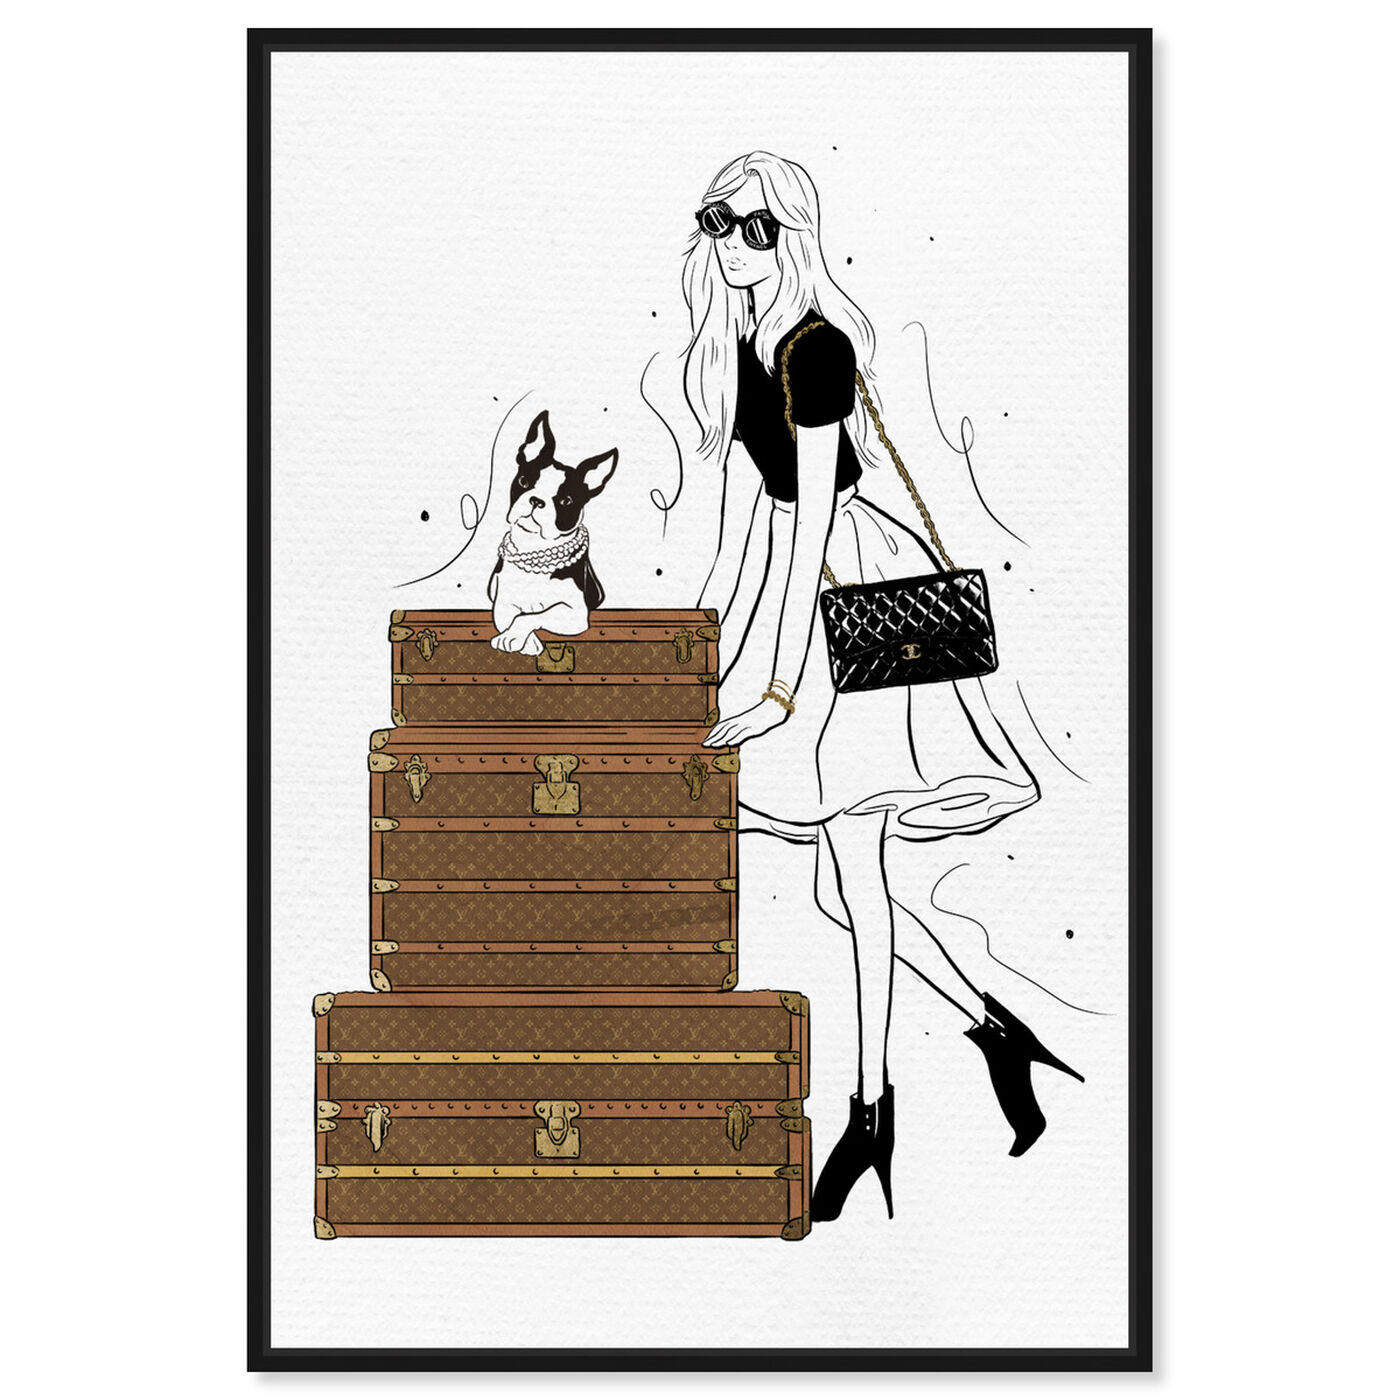 Oliver Gal Travel in Style Canvas Wall Art